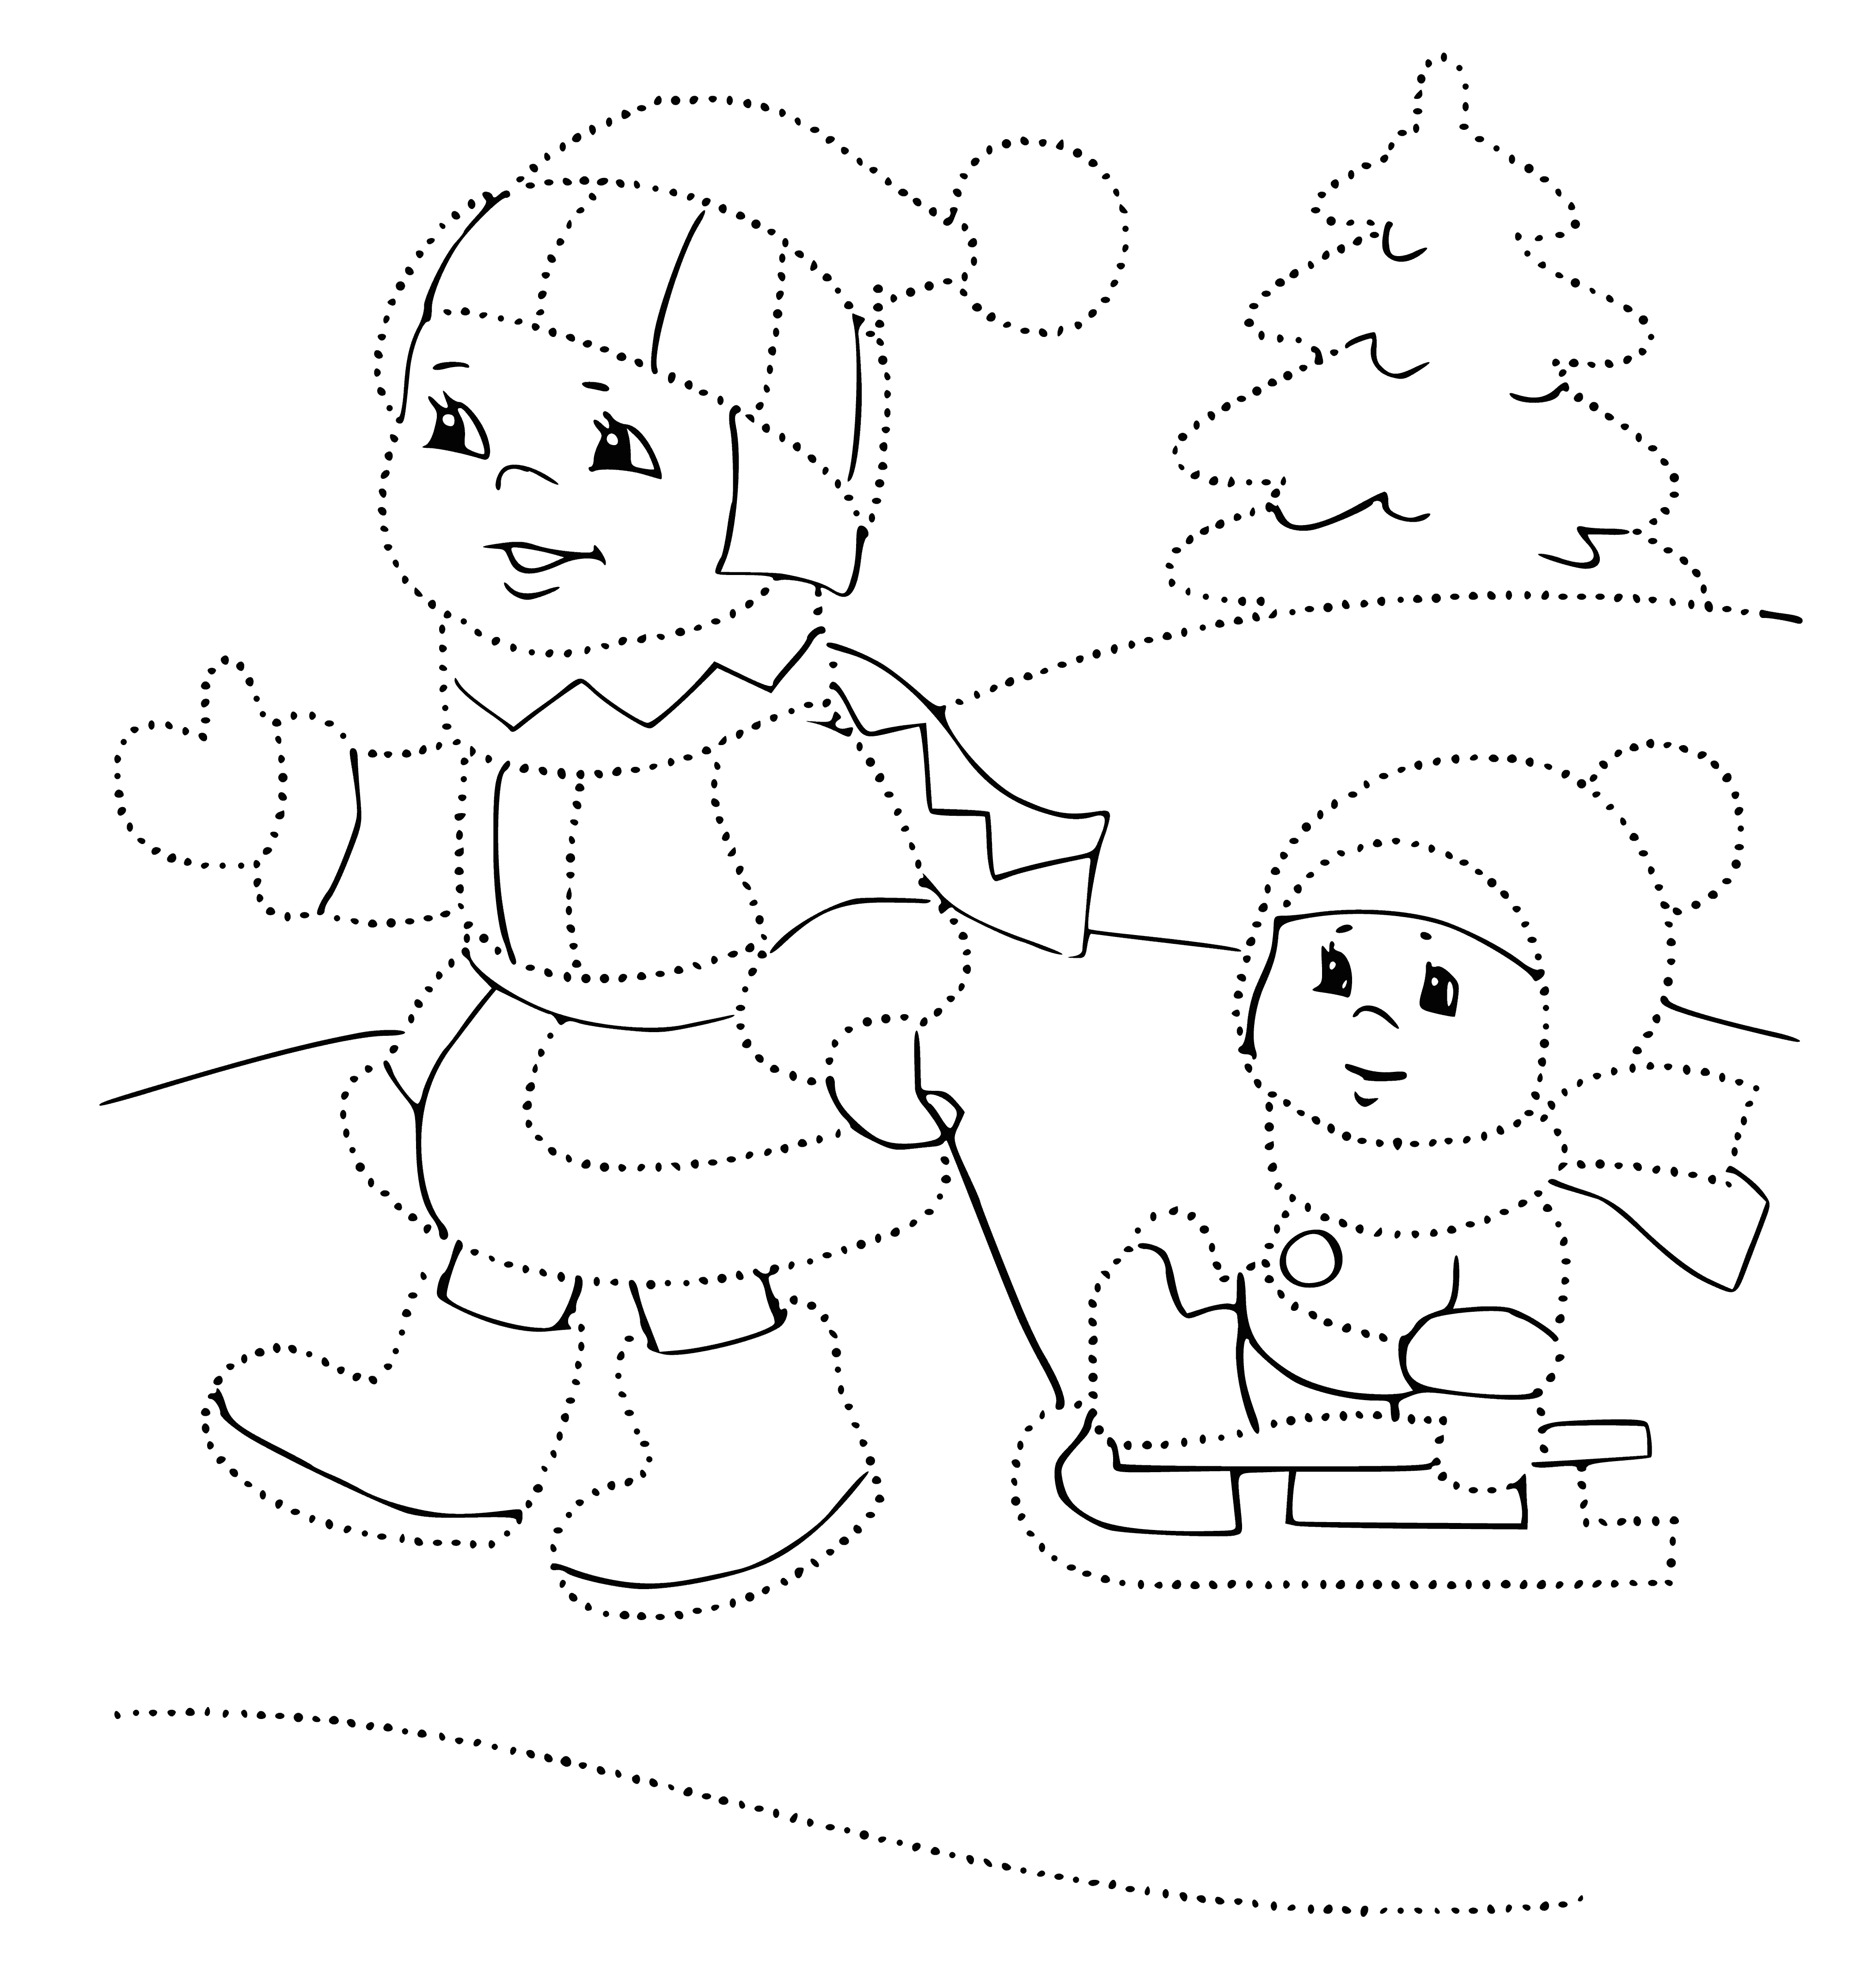 On the sledge coloring page